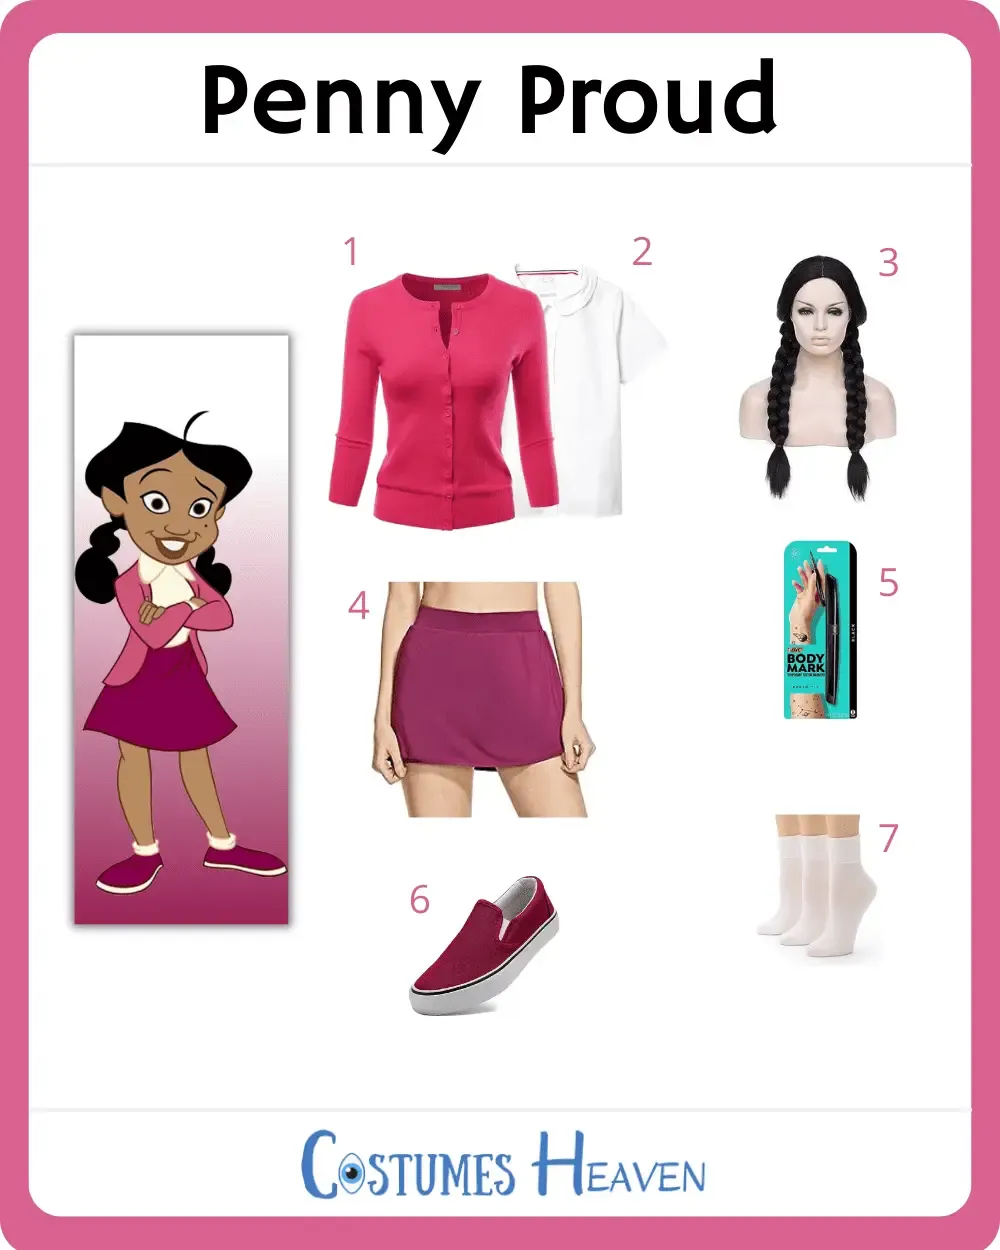 Penny Proud Outfits